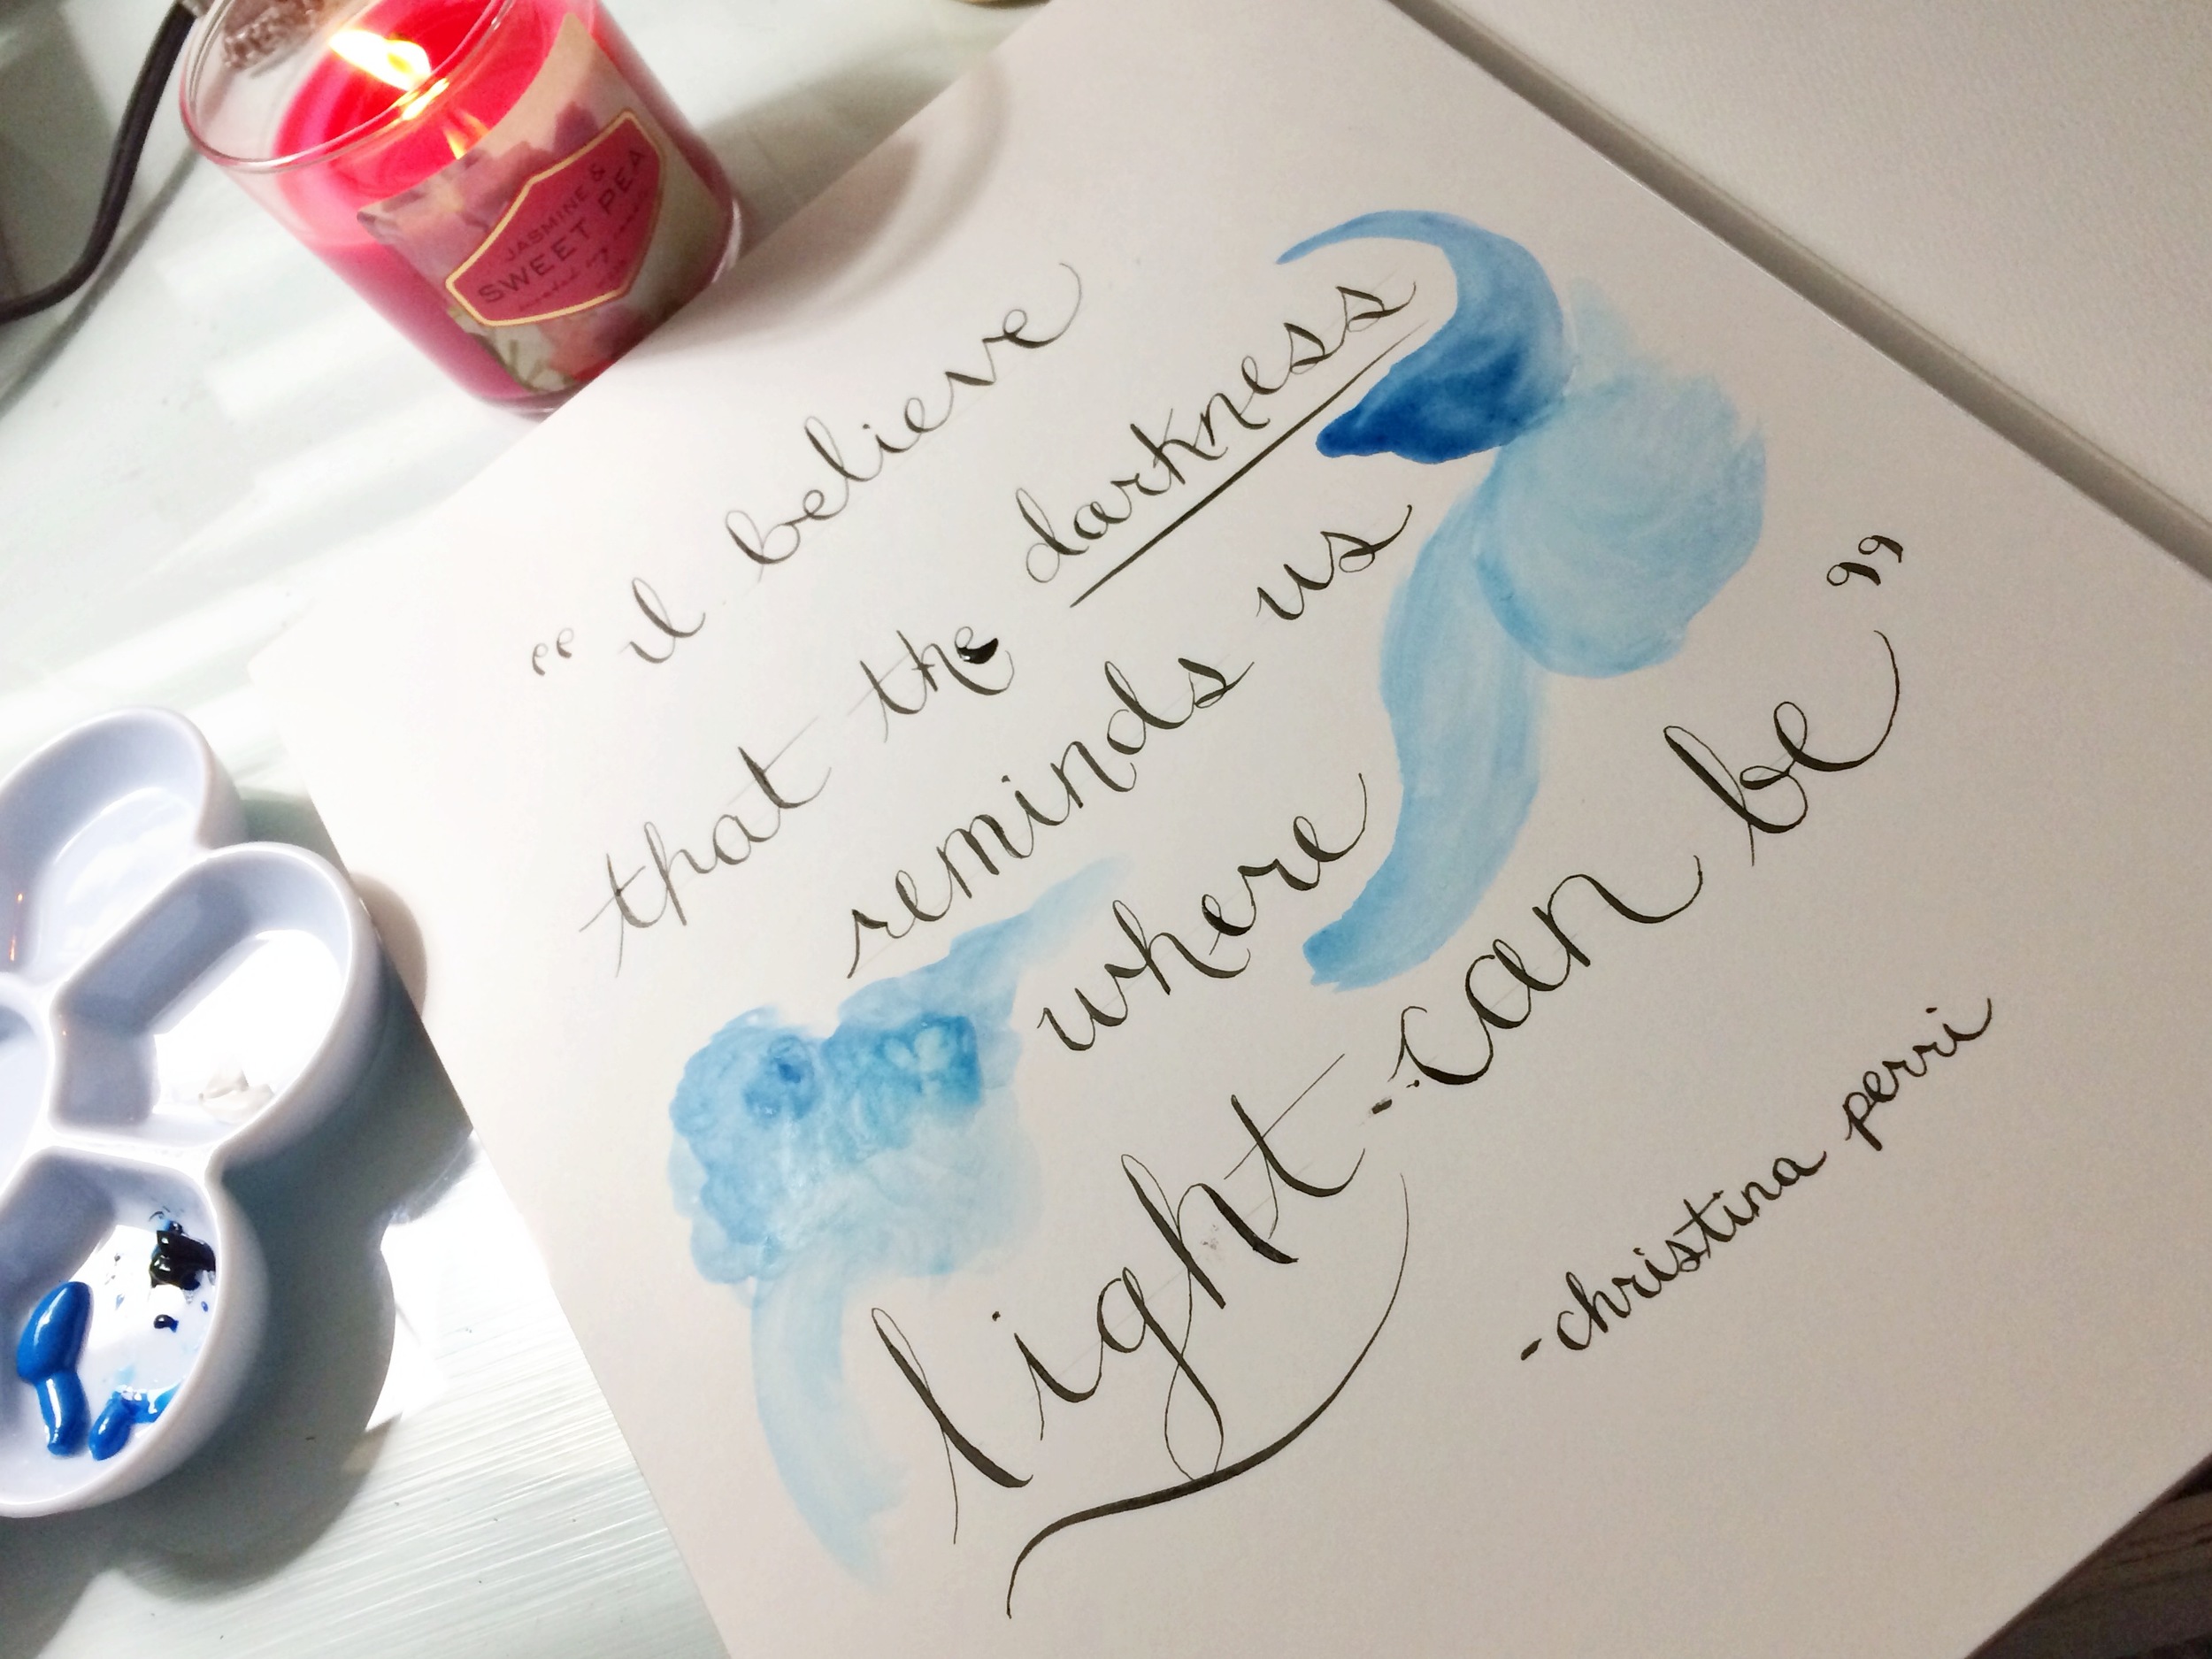 practicing my calligraphy and playing with a new set of watercolors & watercolor paper.